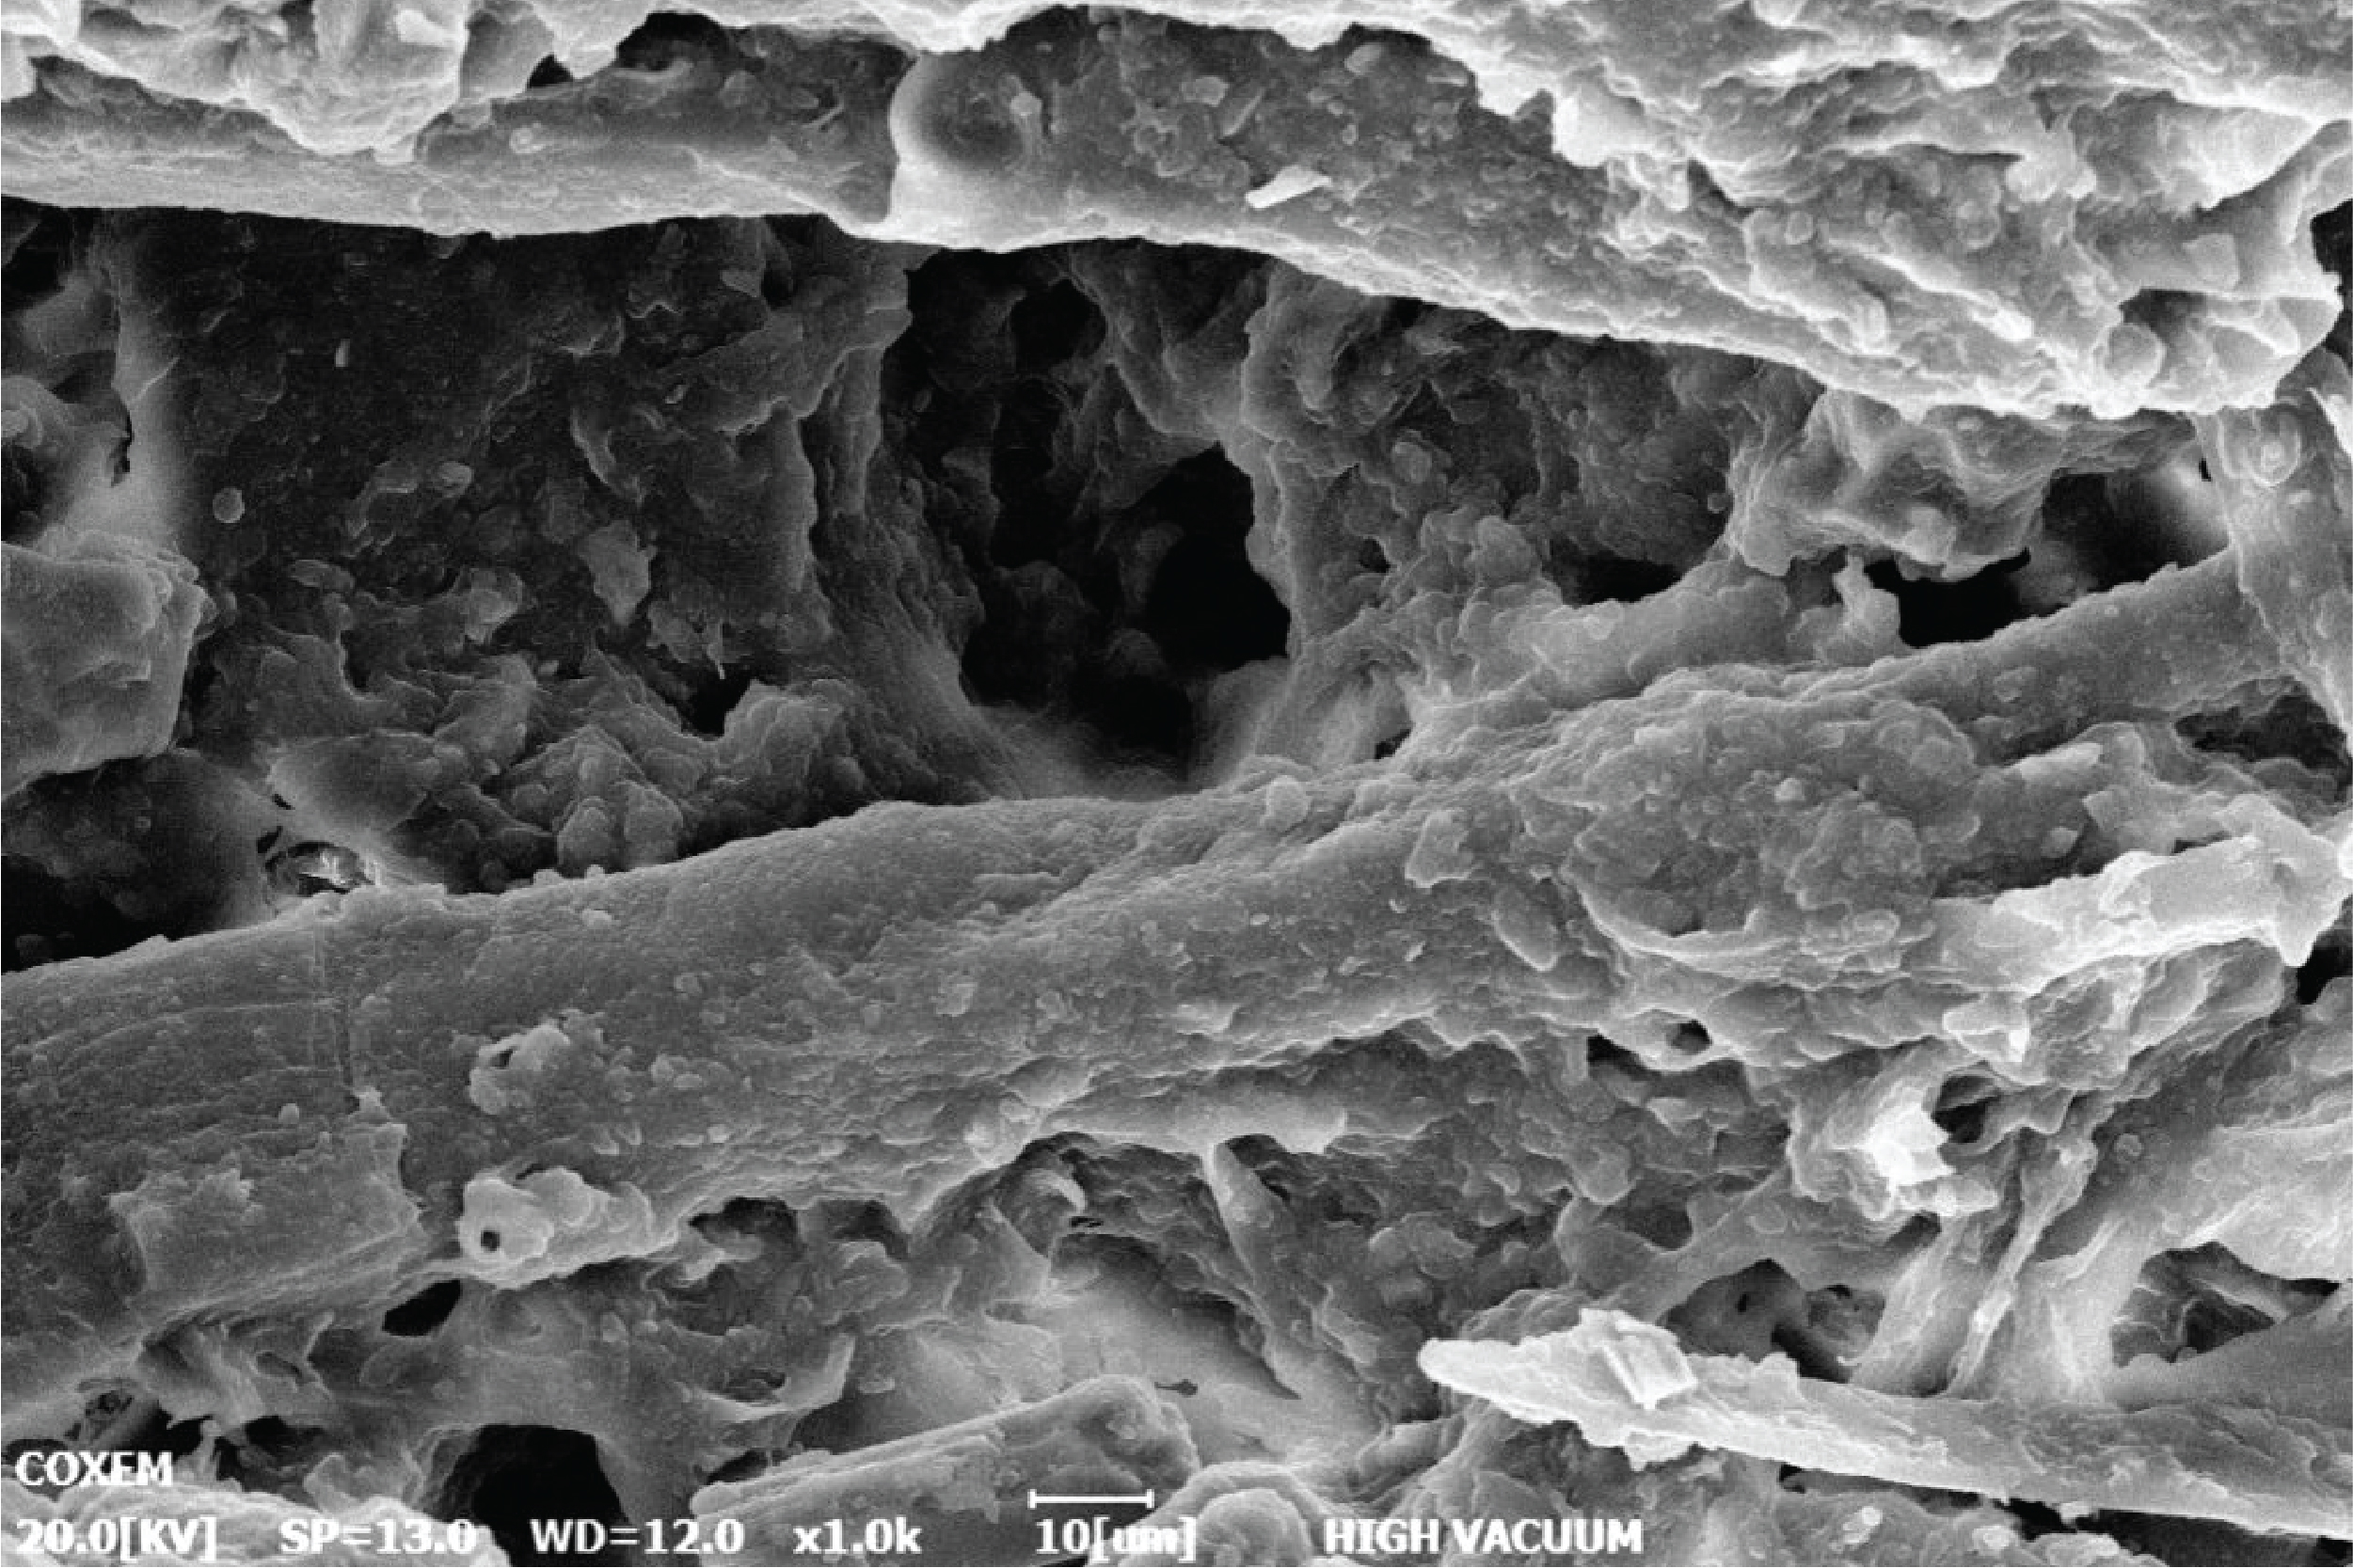 Table-top Scanning Electron Microscope